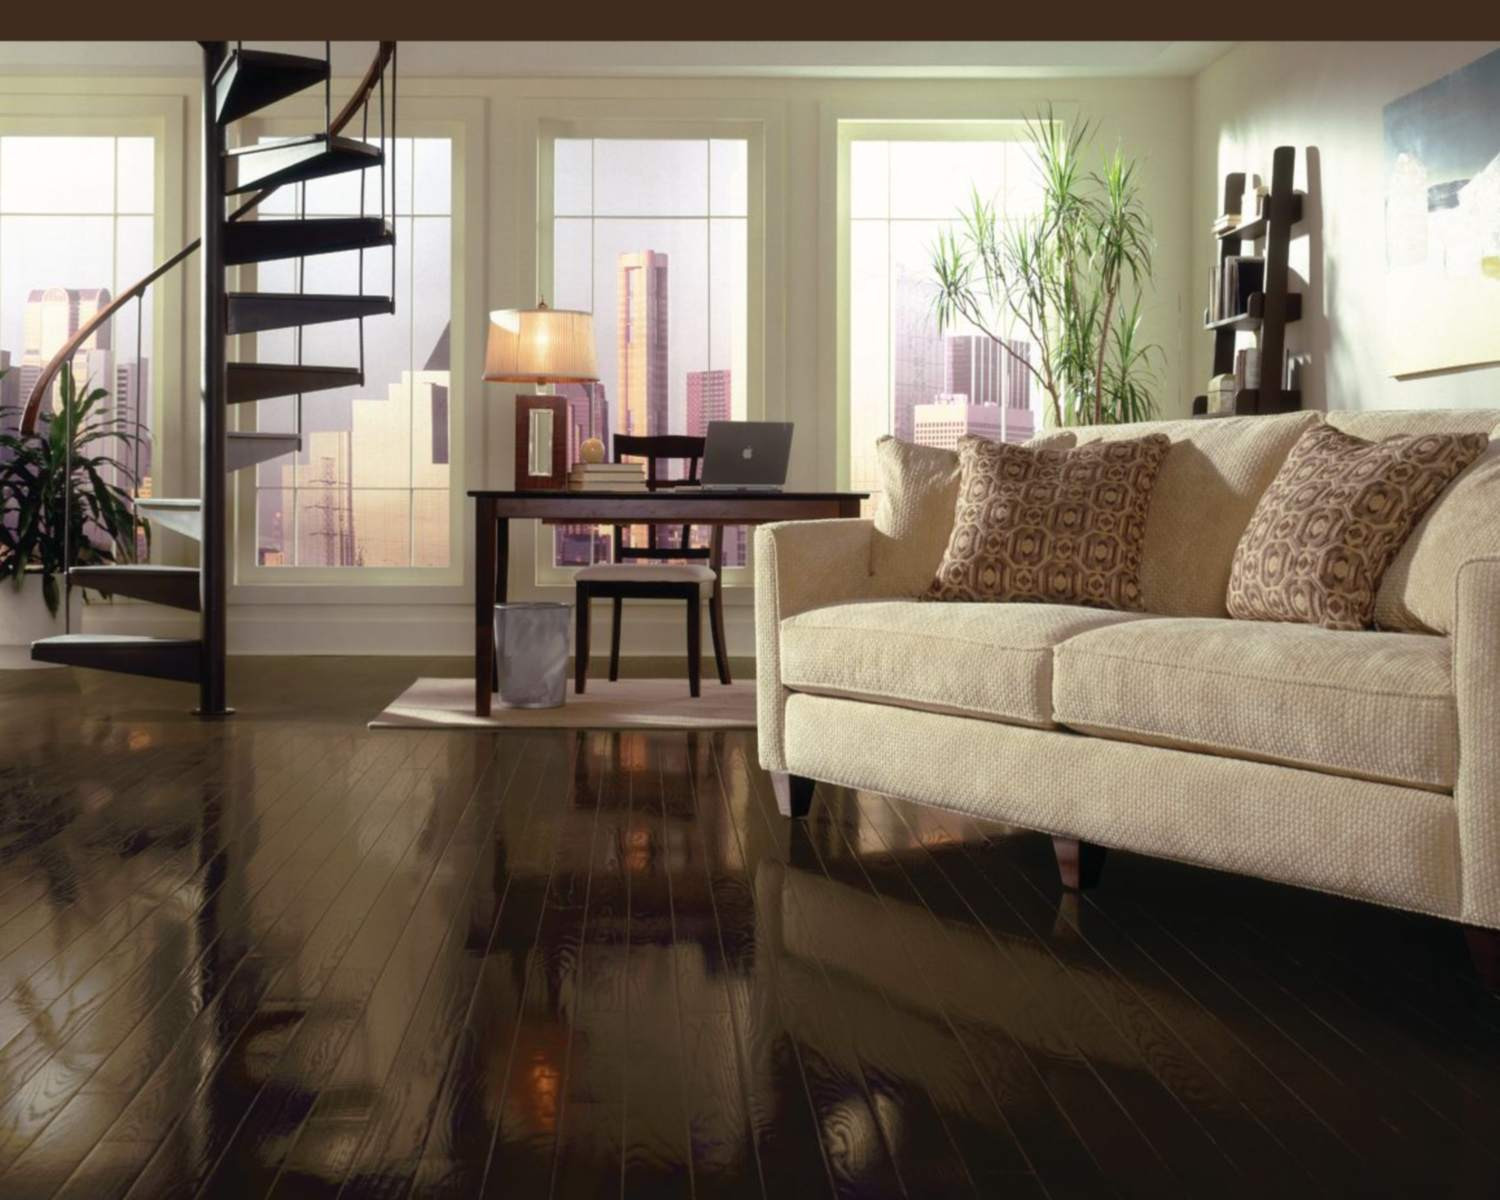 26 Fantastic How Much Does Home Depot Charge to Install Hardwood Floors 2022 free download how much does home depot charge to install hardwood floors of top 5 brands for solid hardwood flooring intended for a living room with bruce espresso oak flooring